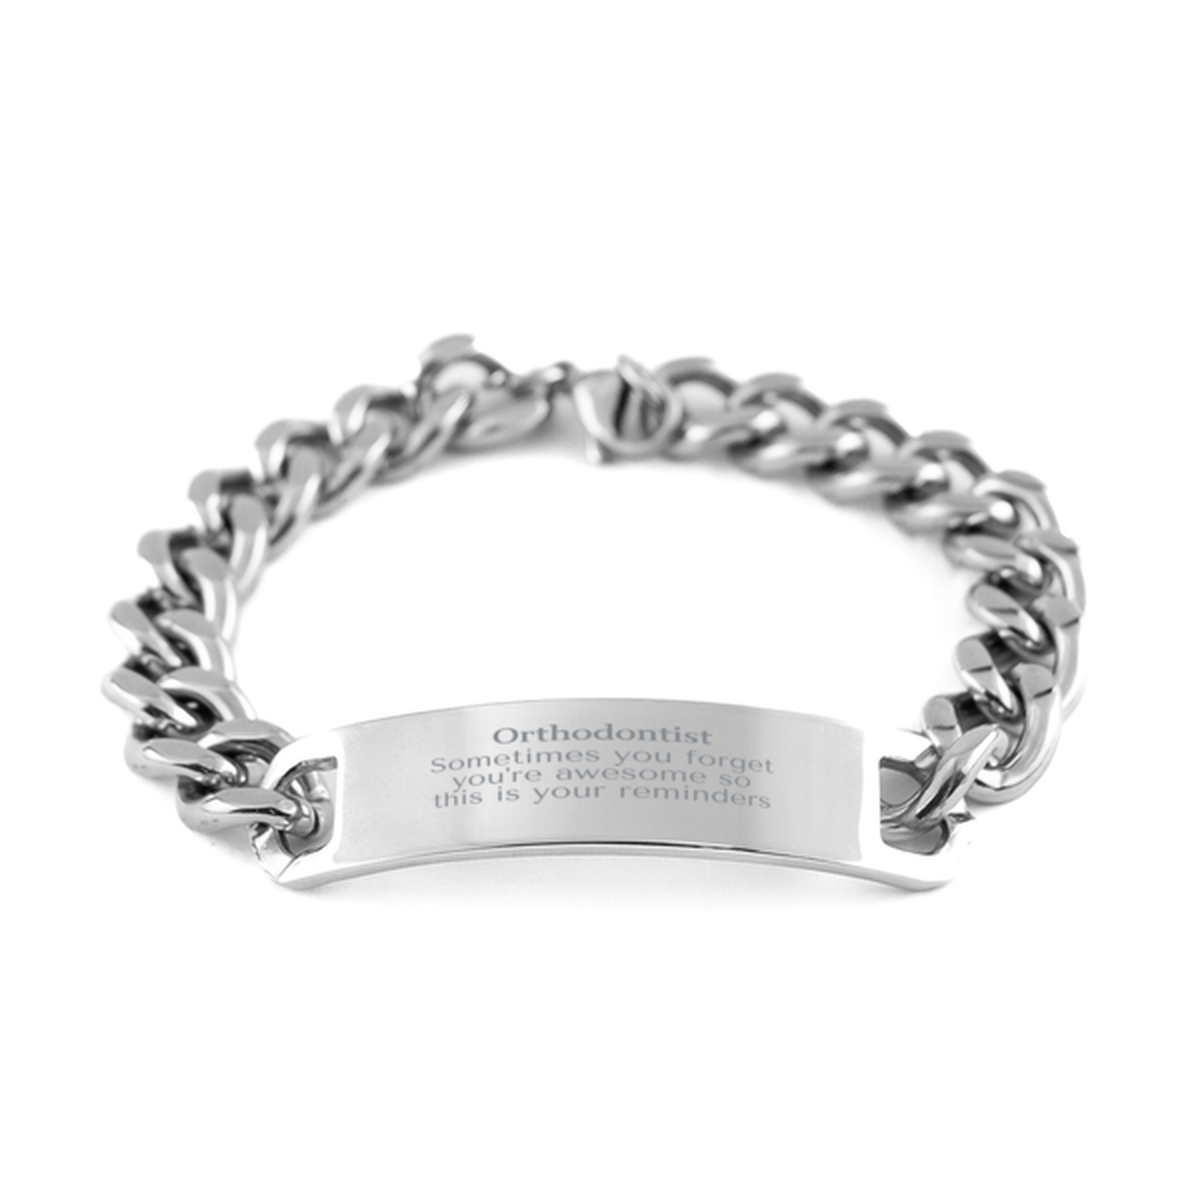 Sentimental Orthodontist Cuban Chain Stainless Steel Bracelet, Orthodontist Sometimes you forget you're awesome so this is your reminders, Graduation Christmas Birthday Gifts for Orthodontist, Men, Women, Coworkers